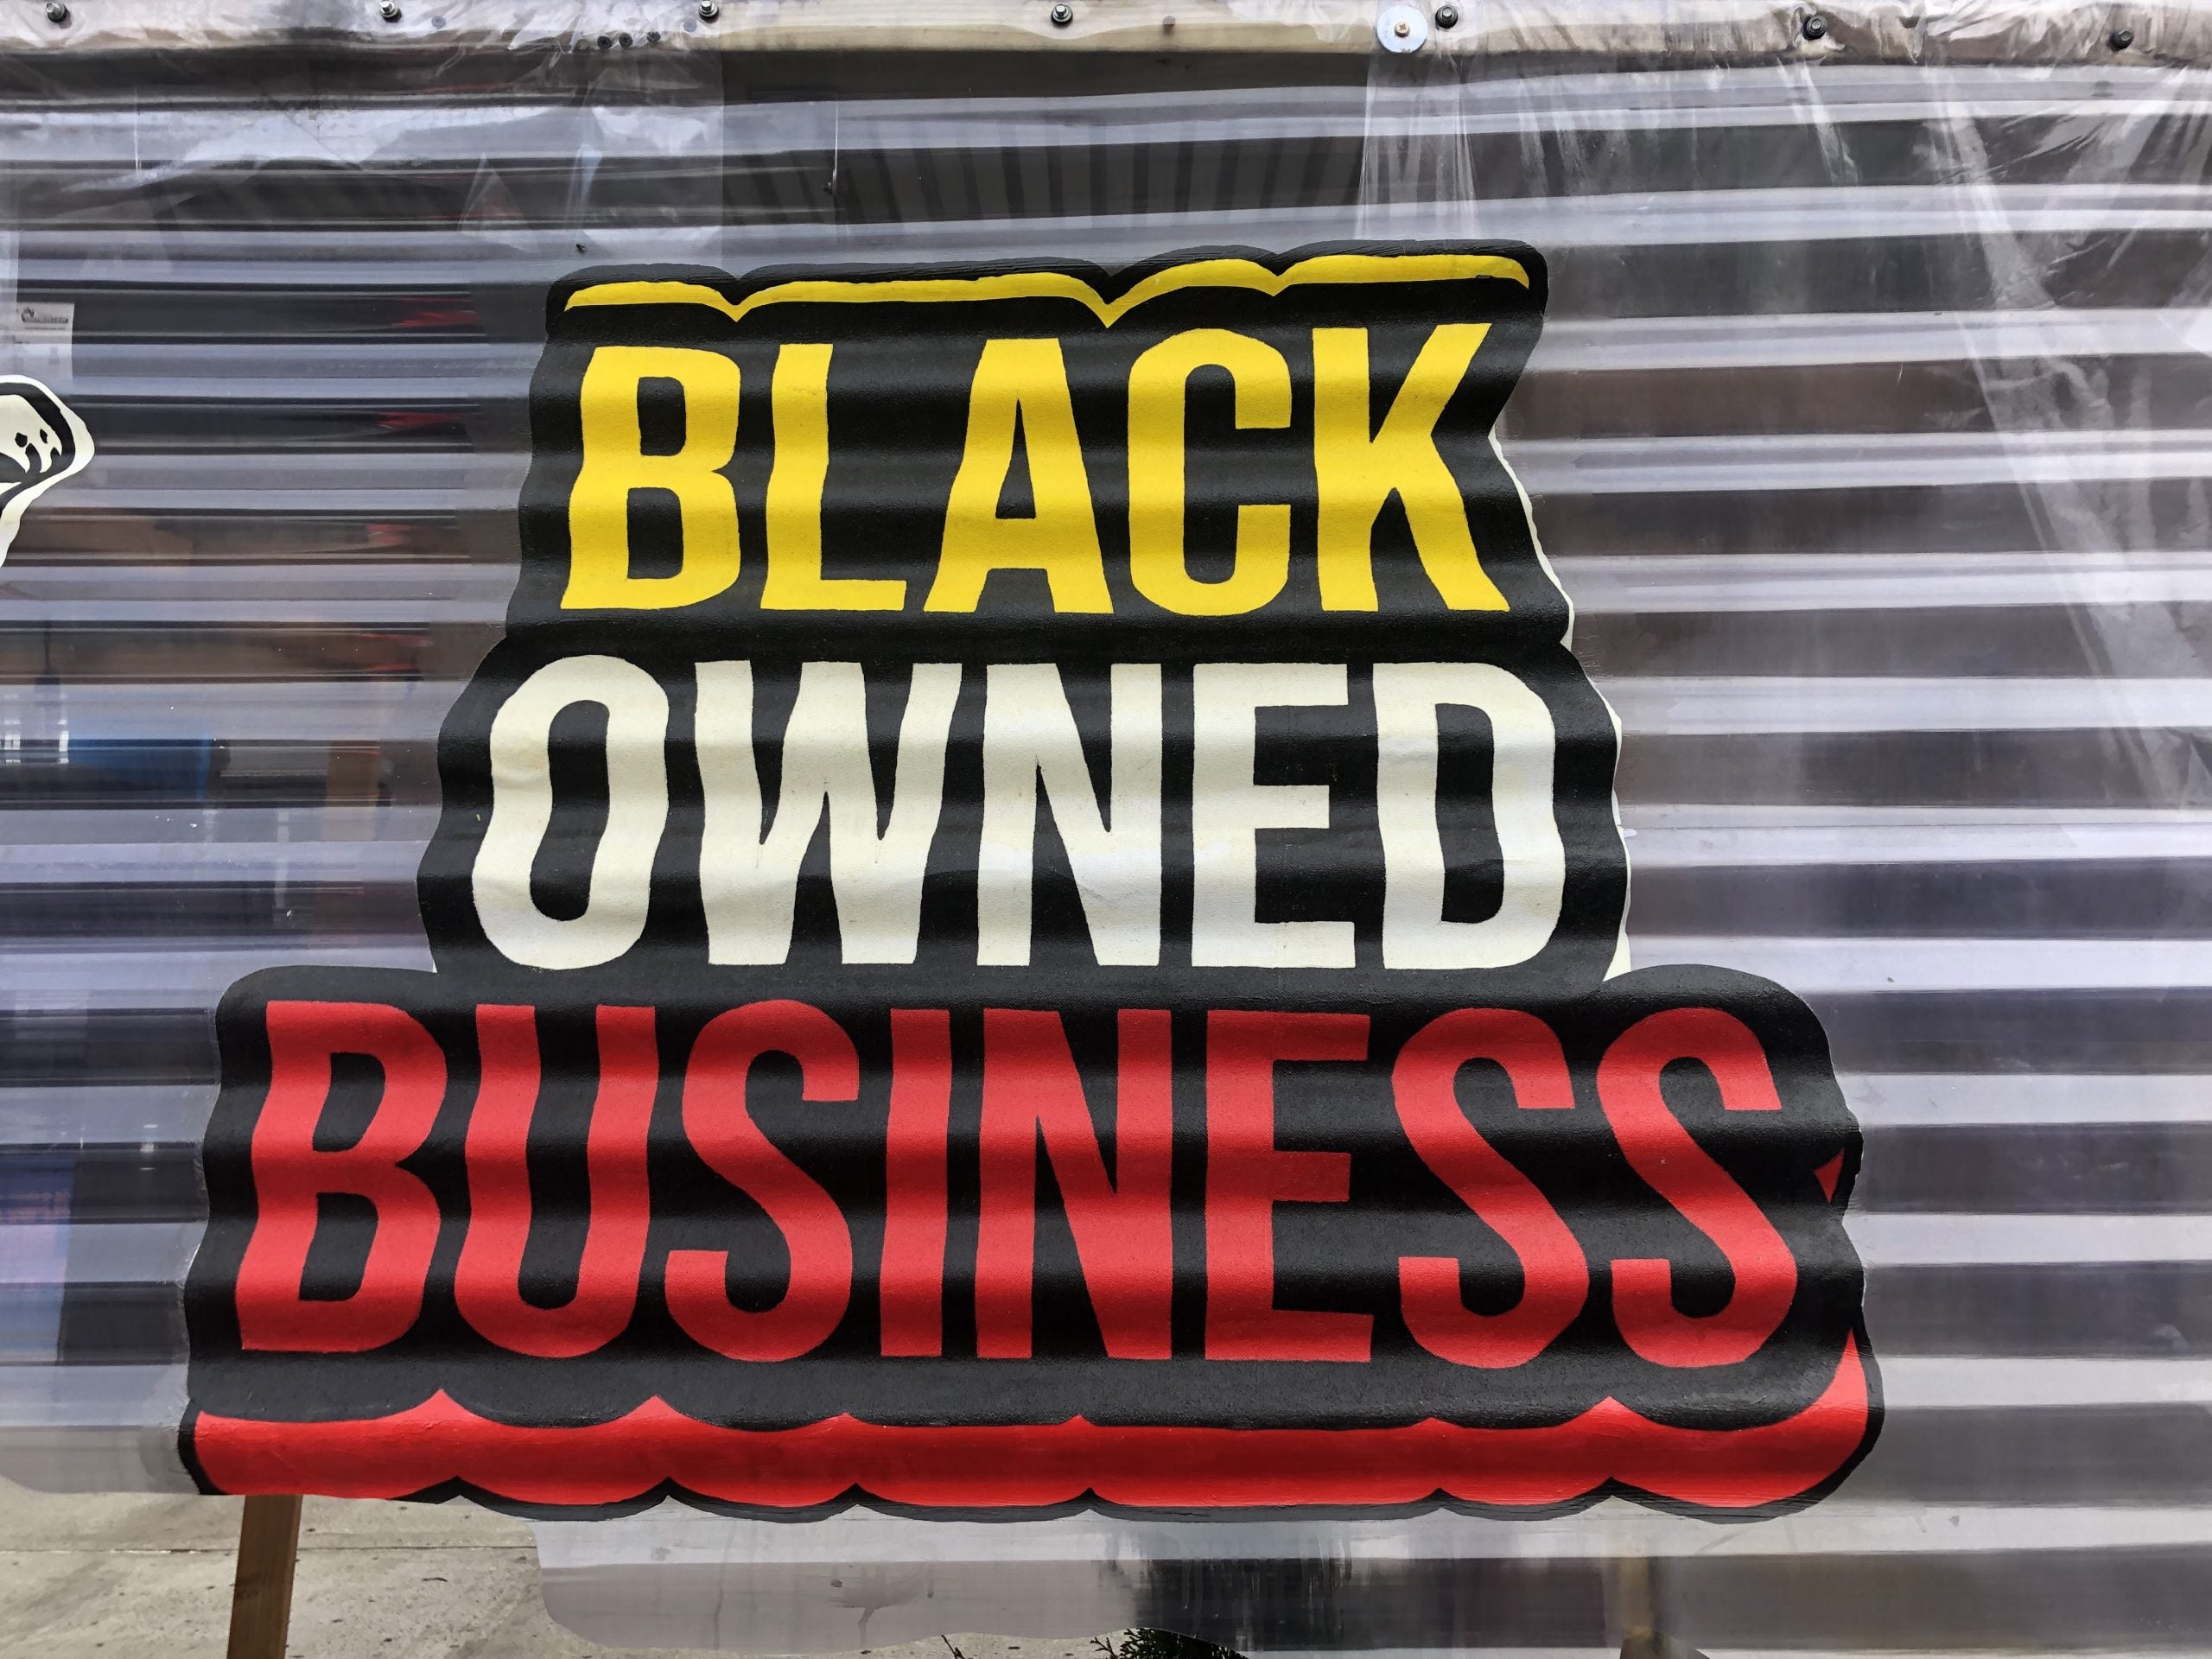 Amazon Gave 'Black-Owned' Small Business Badges To Non-Black Companies, New Report Shows